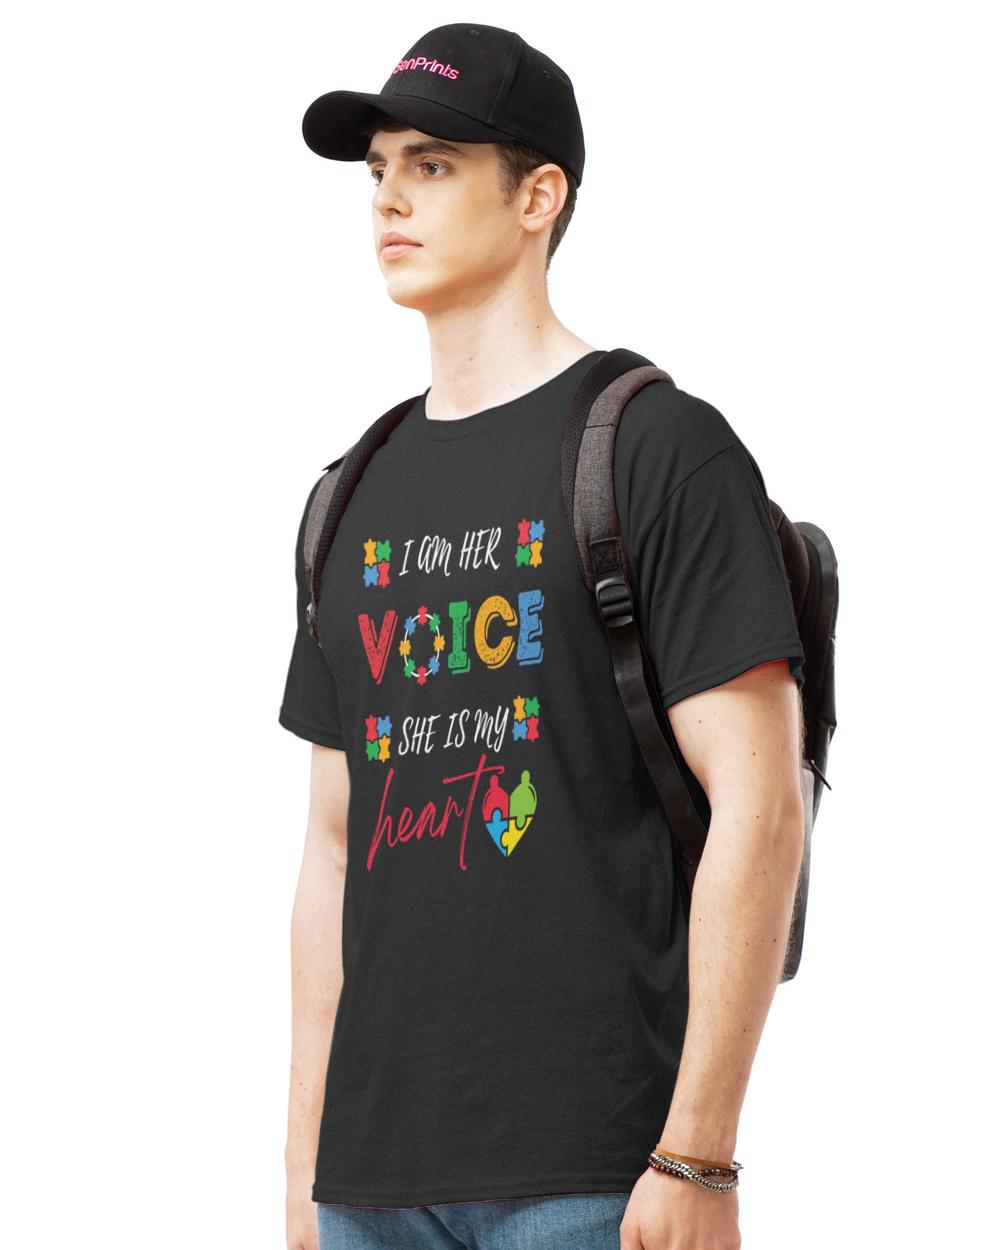 Autism Support T- Shirt Autism Support and Love T- Shirt